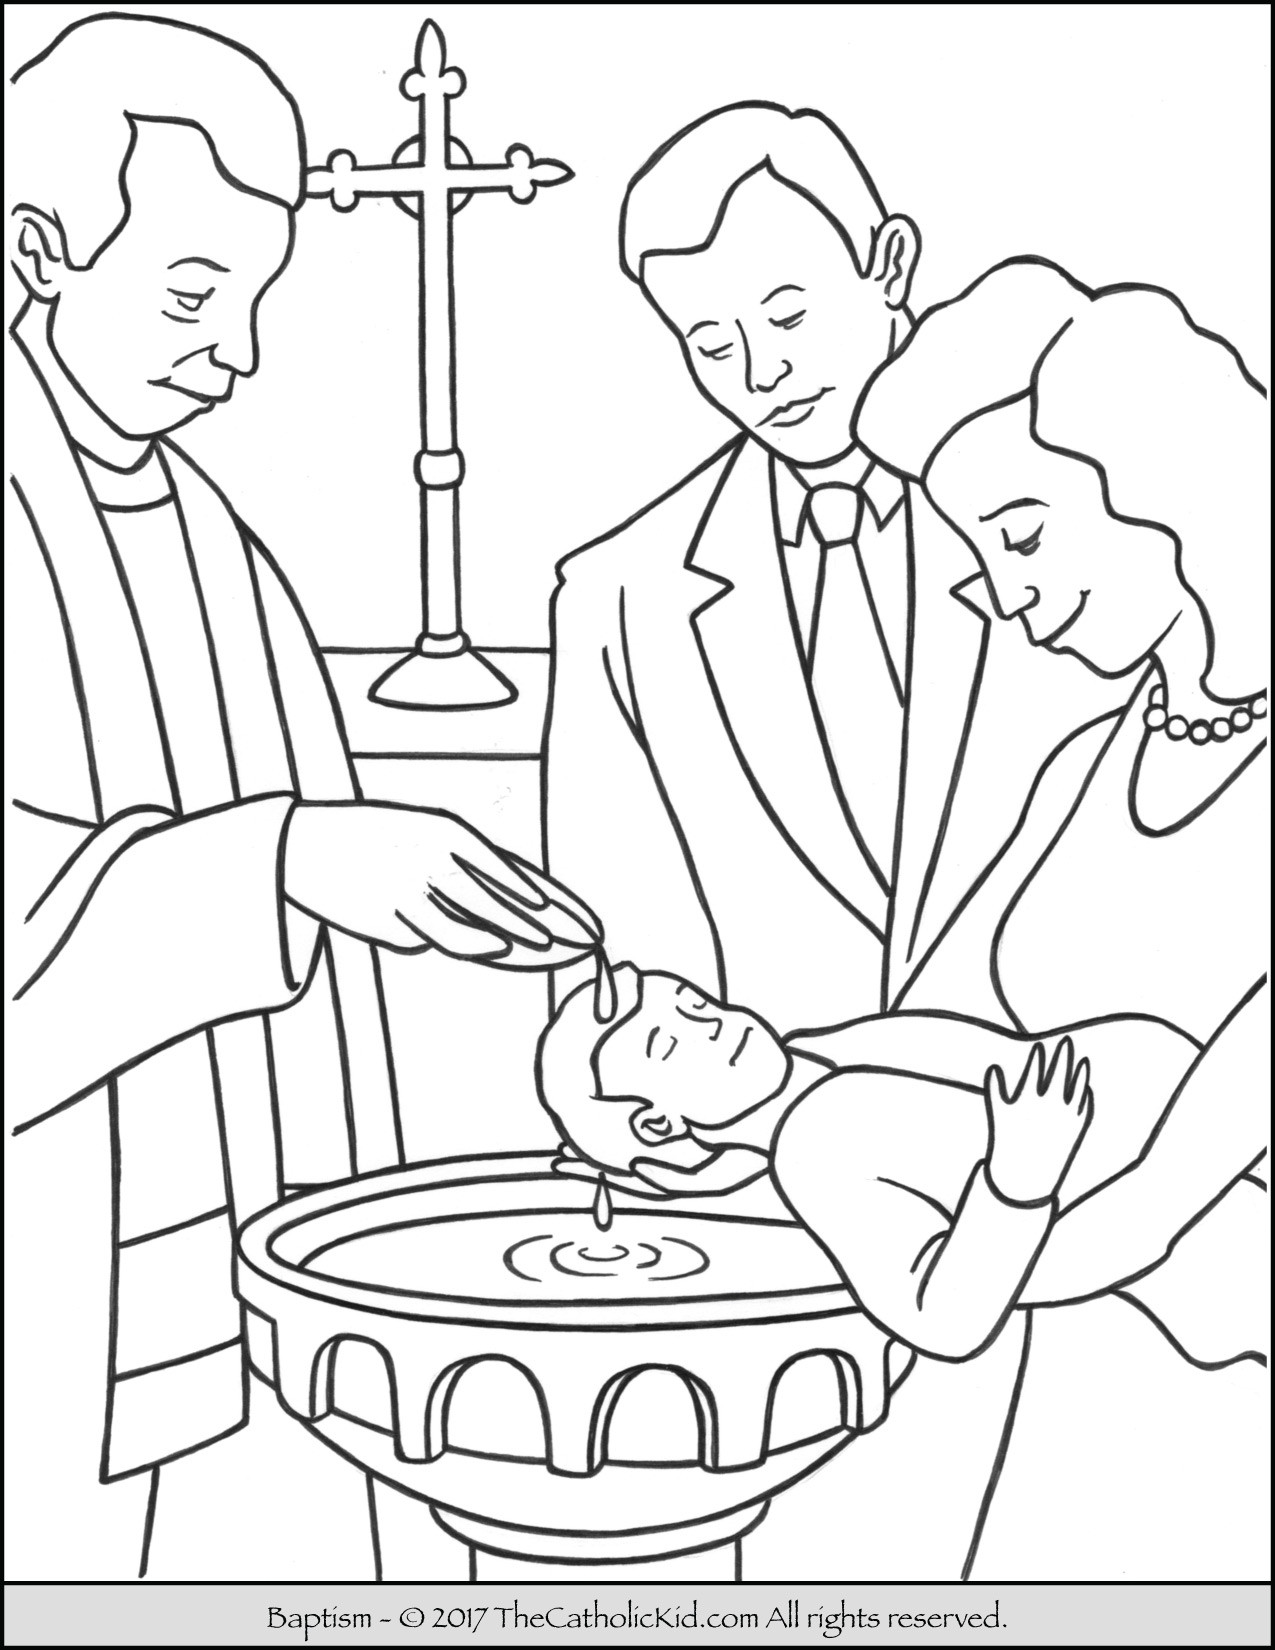 Baptism Coloring Pages For Kids
 Sacrament of Baptism Coloring Page TheCatholicKid